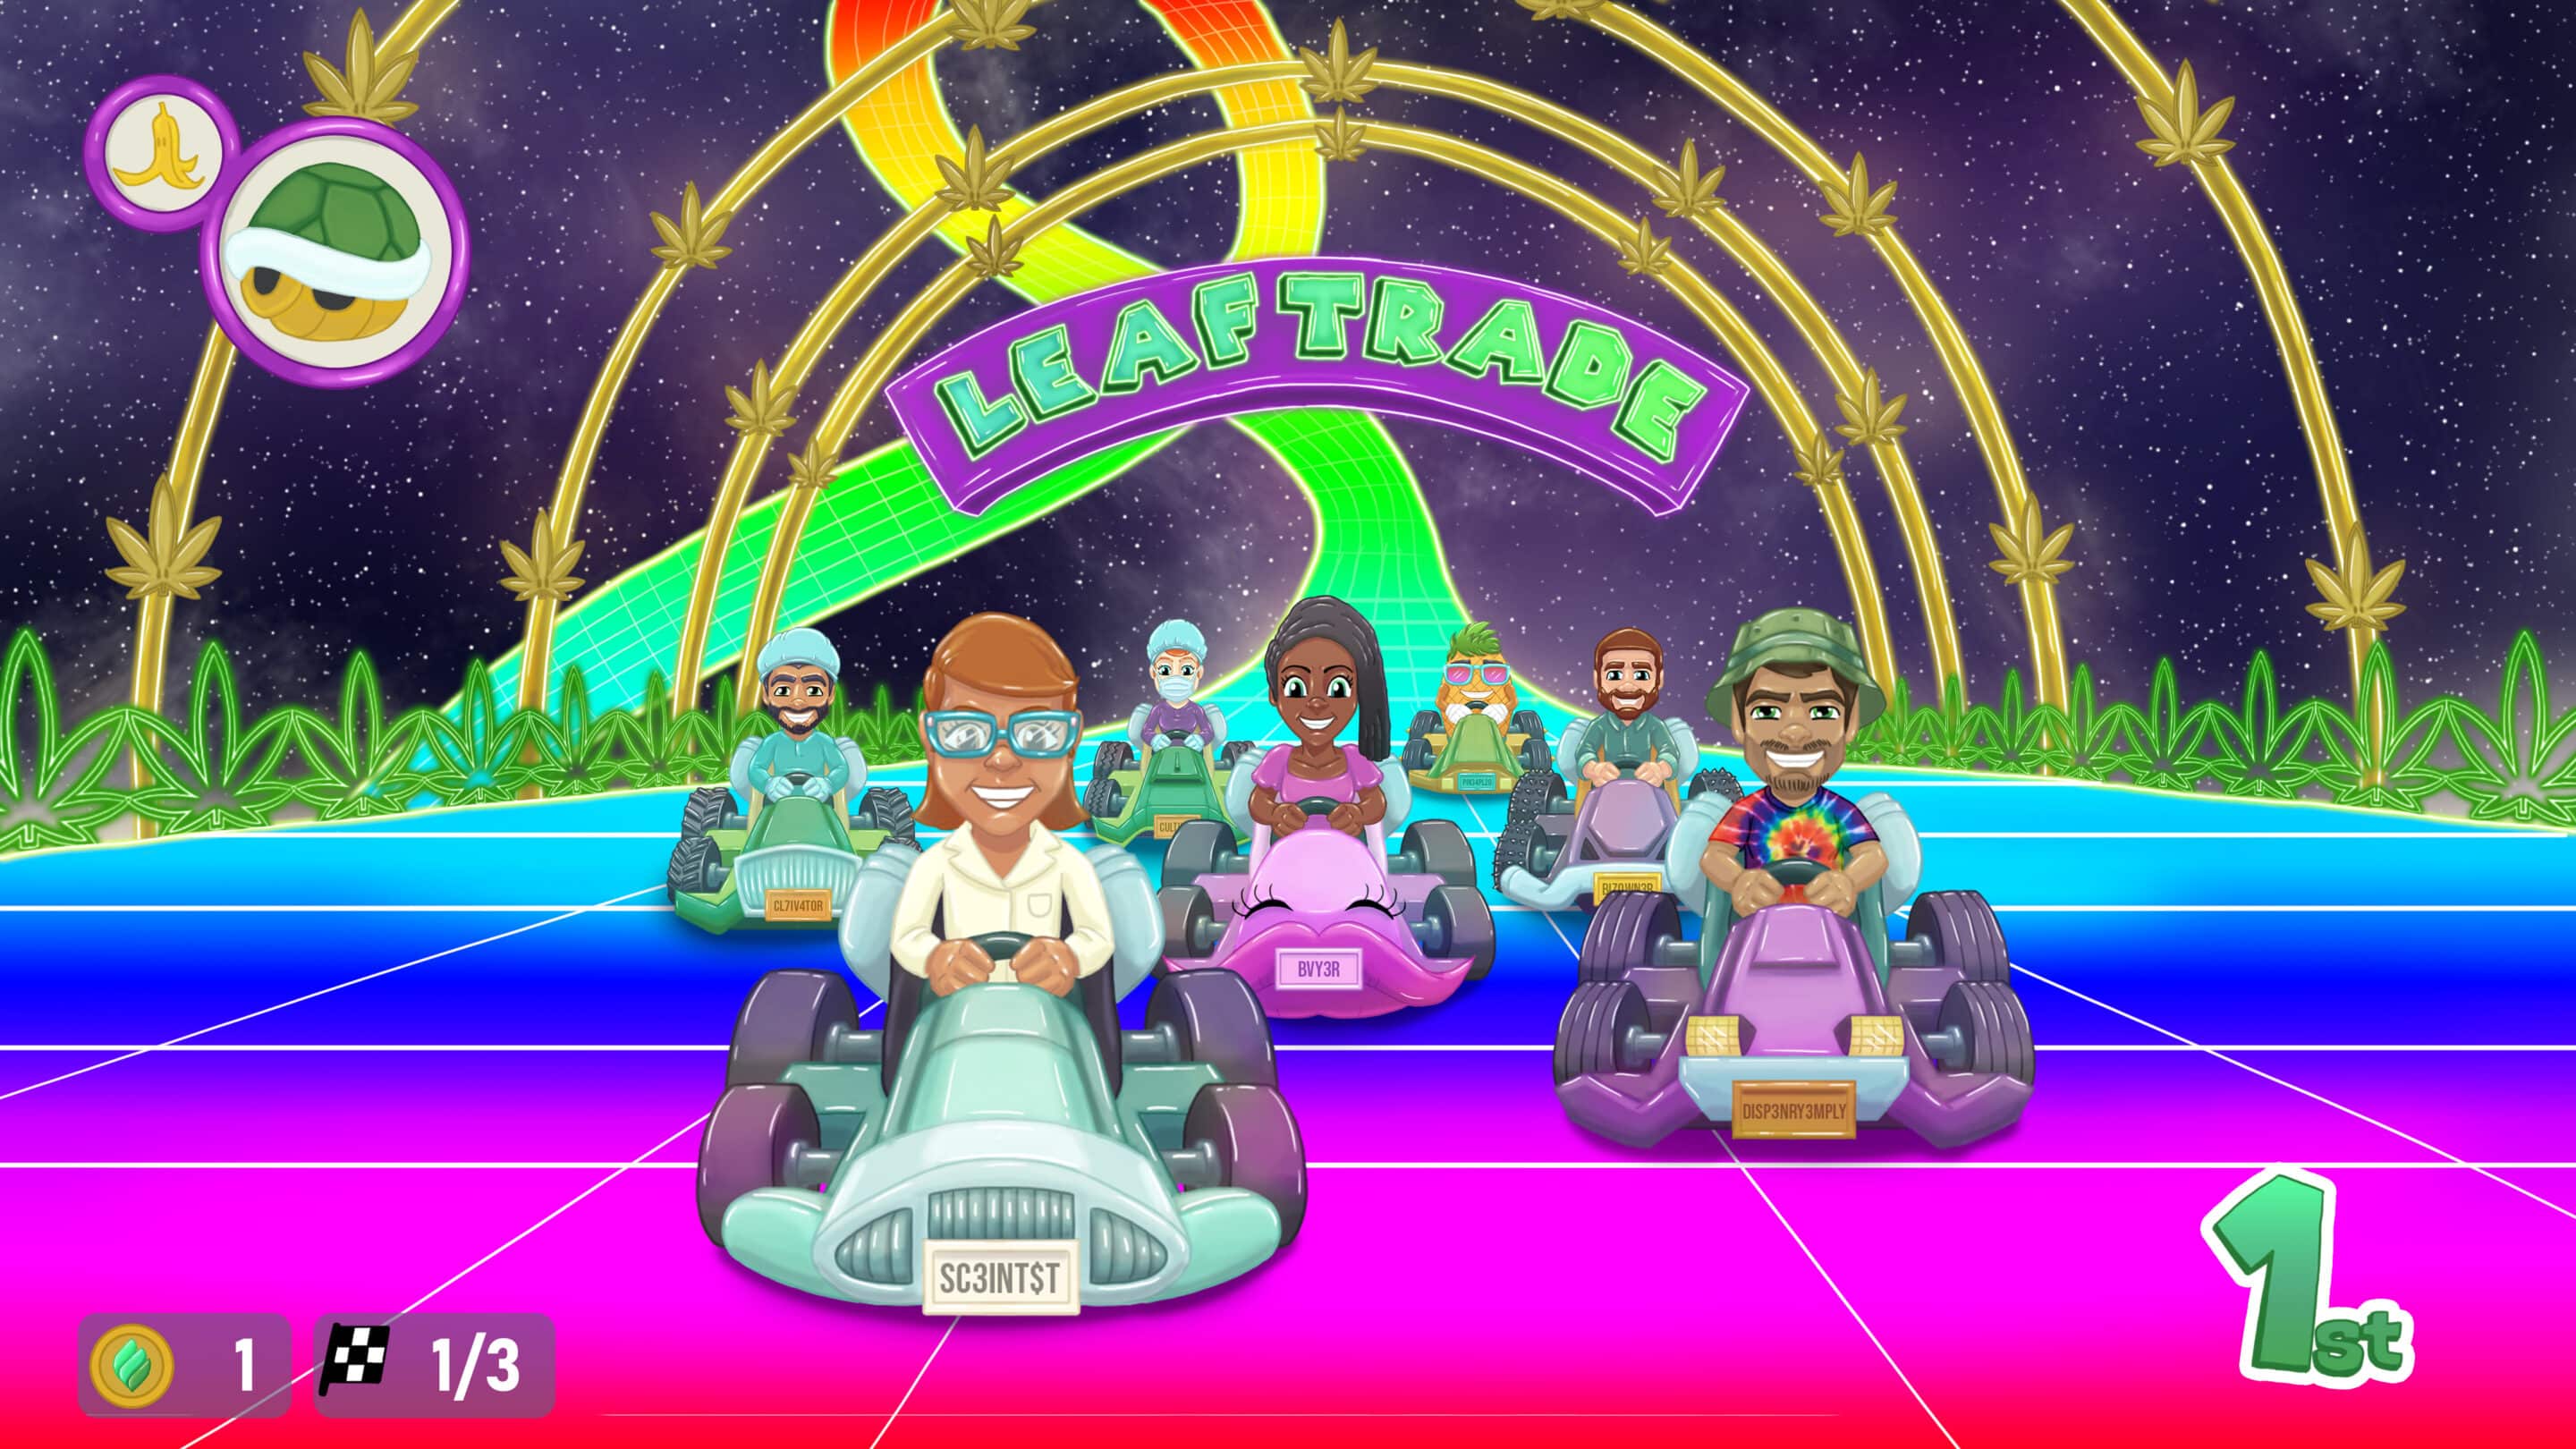 Animated image of people with different roles in the cannabis industry racing on a rainbow colored race track